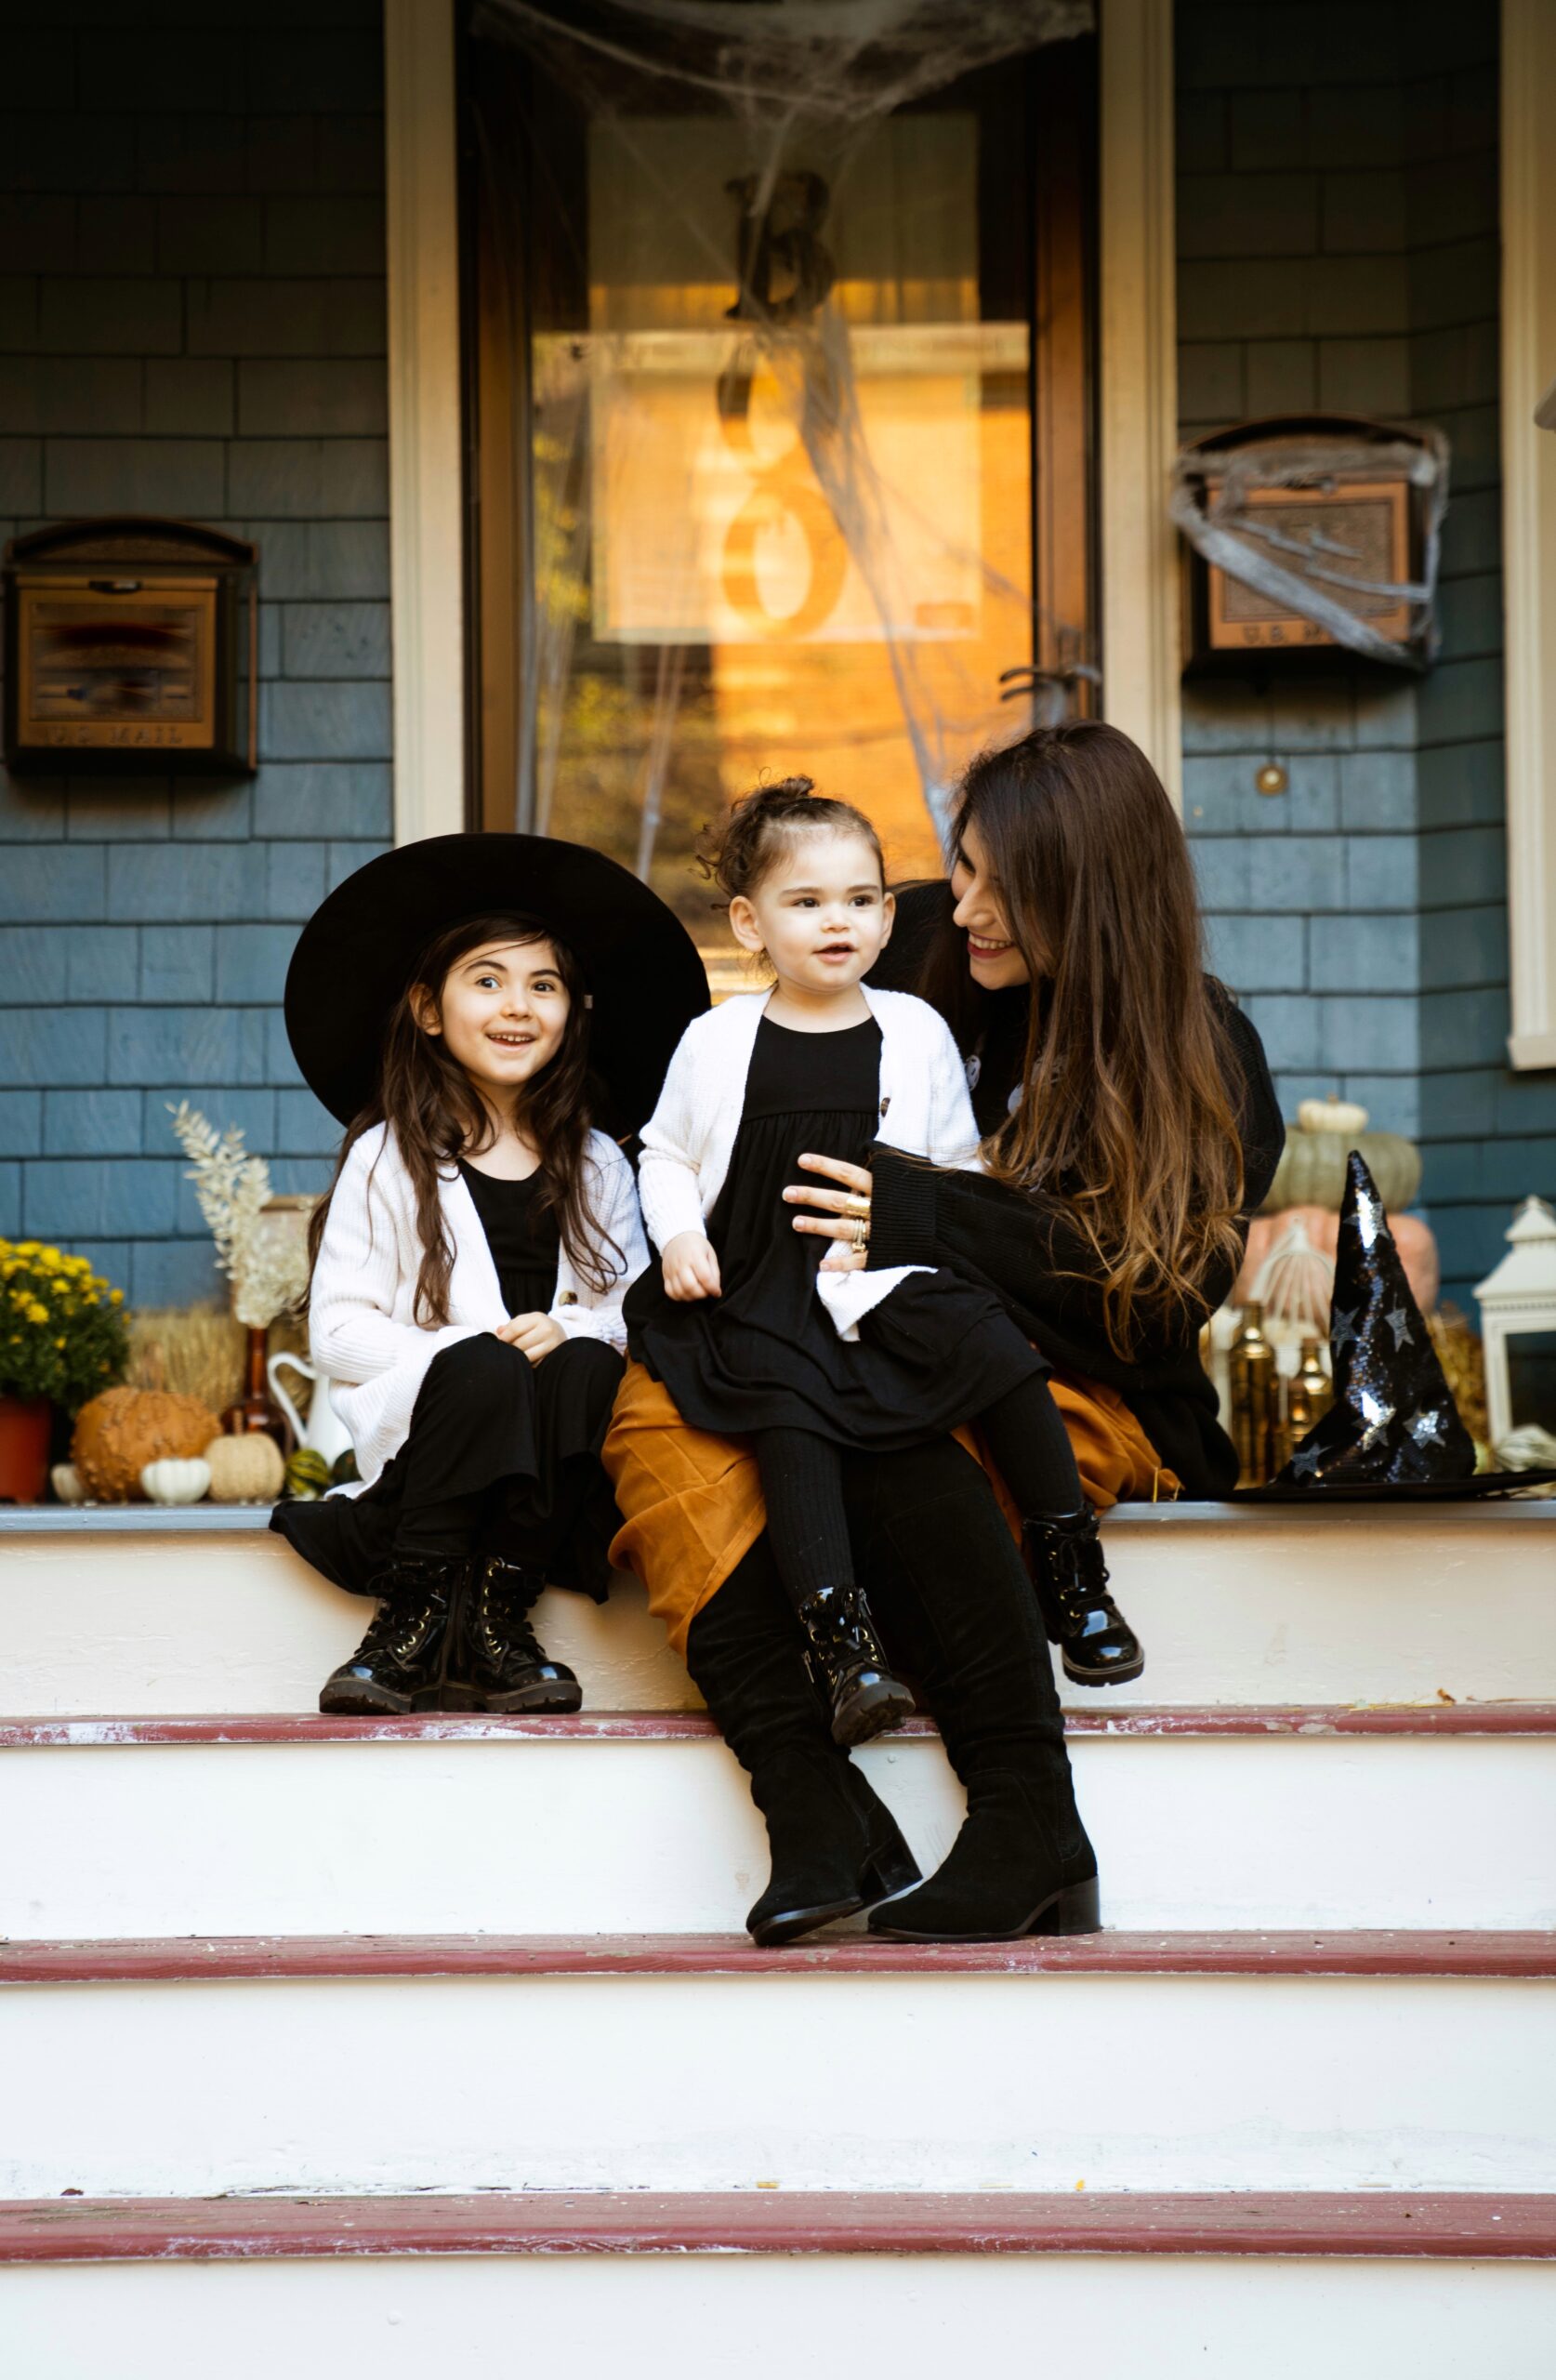 It’s time to decorate your front porch for fall! I’m sharing easy tips and tricks for styling a Halloween porch that can easily transition to a fall porch just in time for Thanksgiving! | @glitterinclexi | GLITTERINC.COM